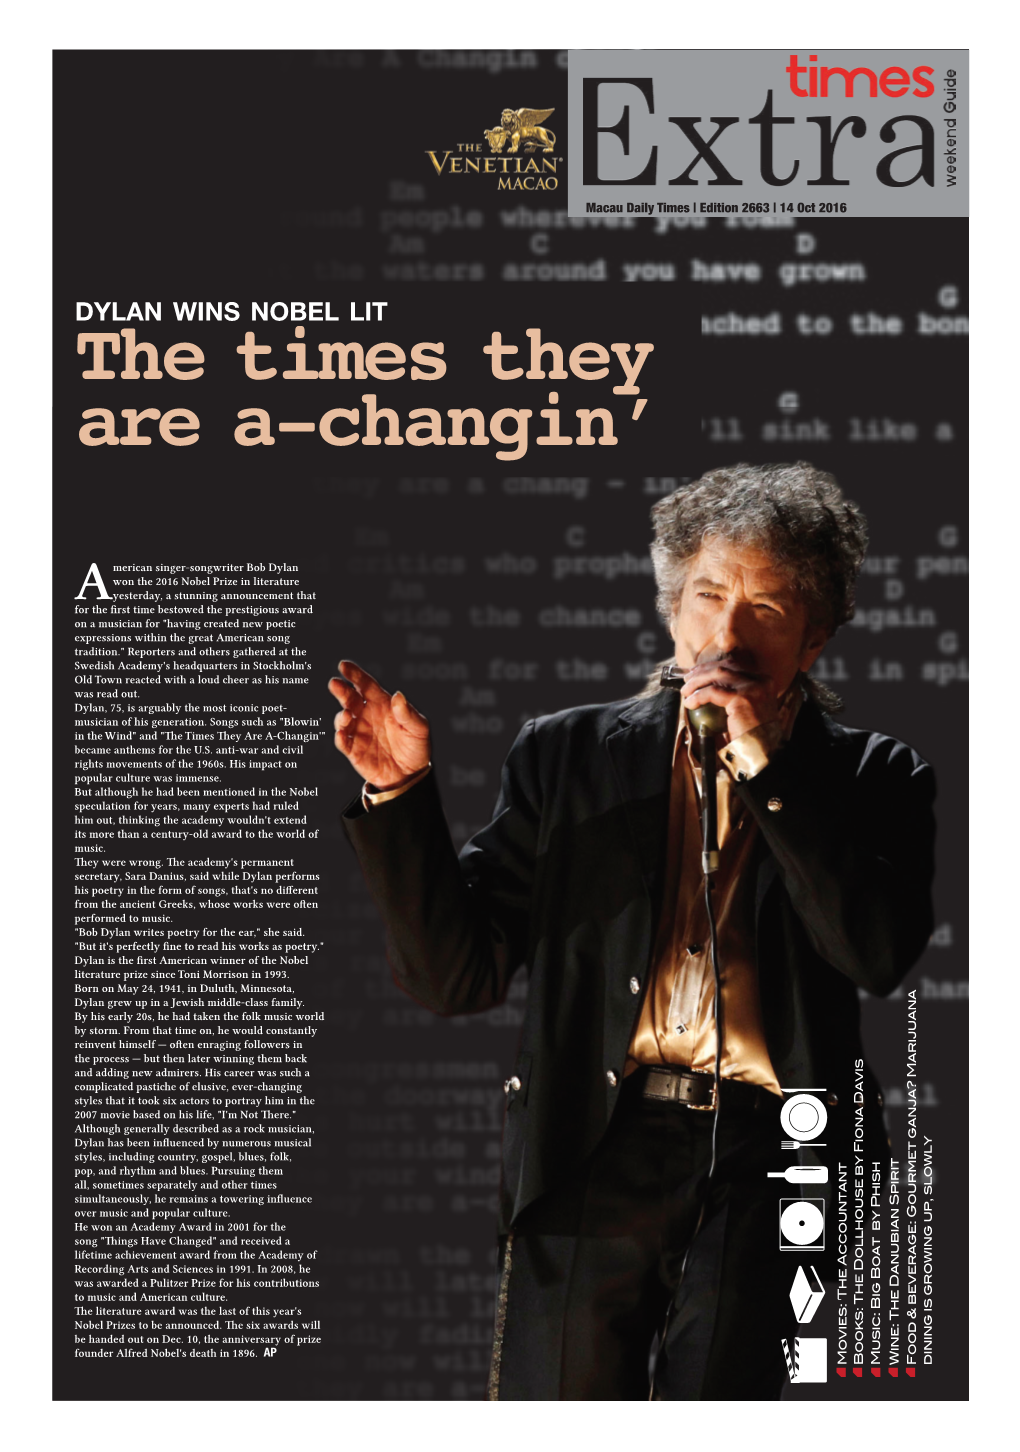 Extra 2663 – Dylan Wins Nobel Lit. | the Times They Are A-Changin